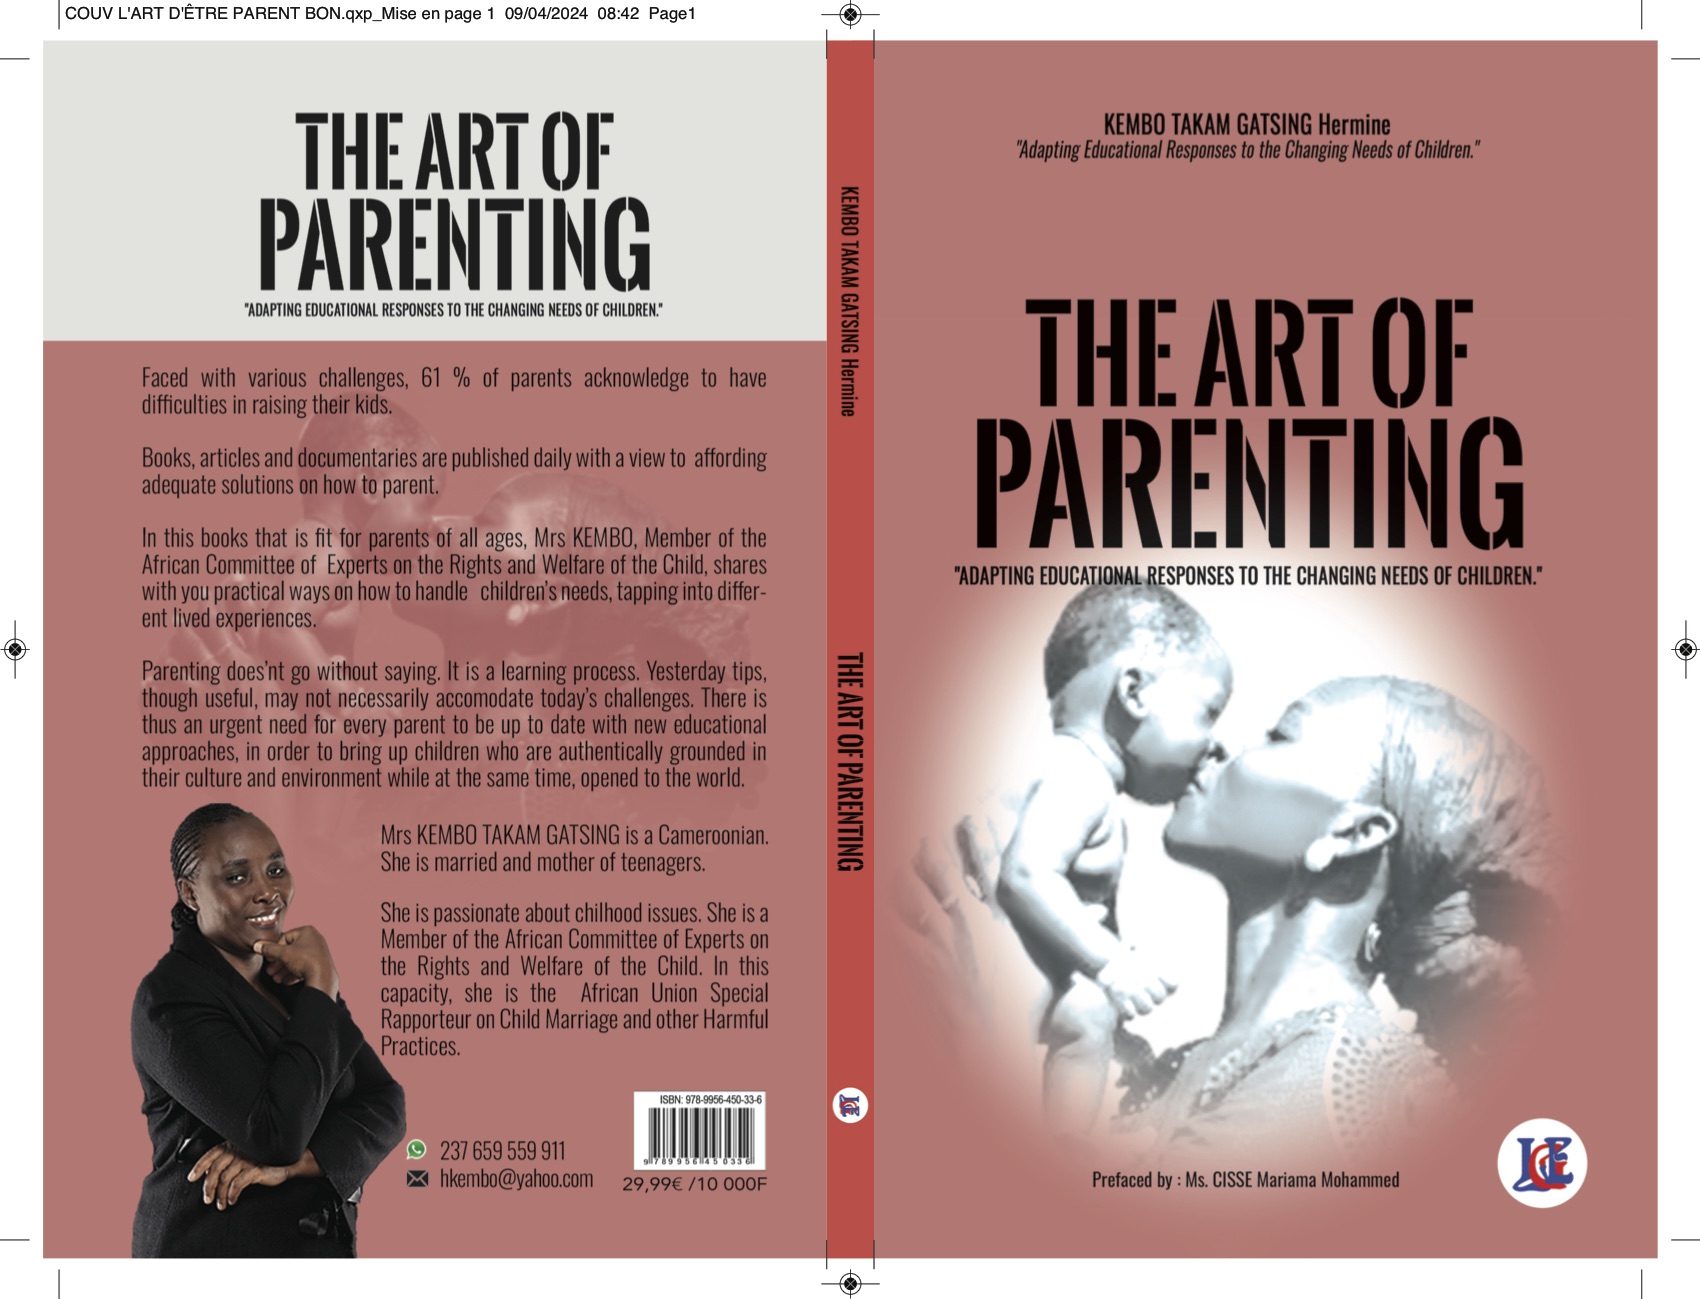 A book on parenting
What you need to know:
About a Child and their needs
About the challenges of parenthood
About the responses to children's needs